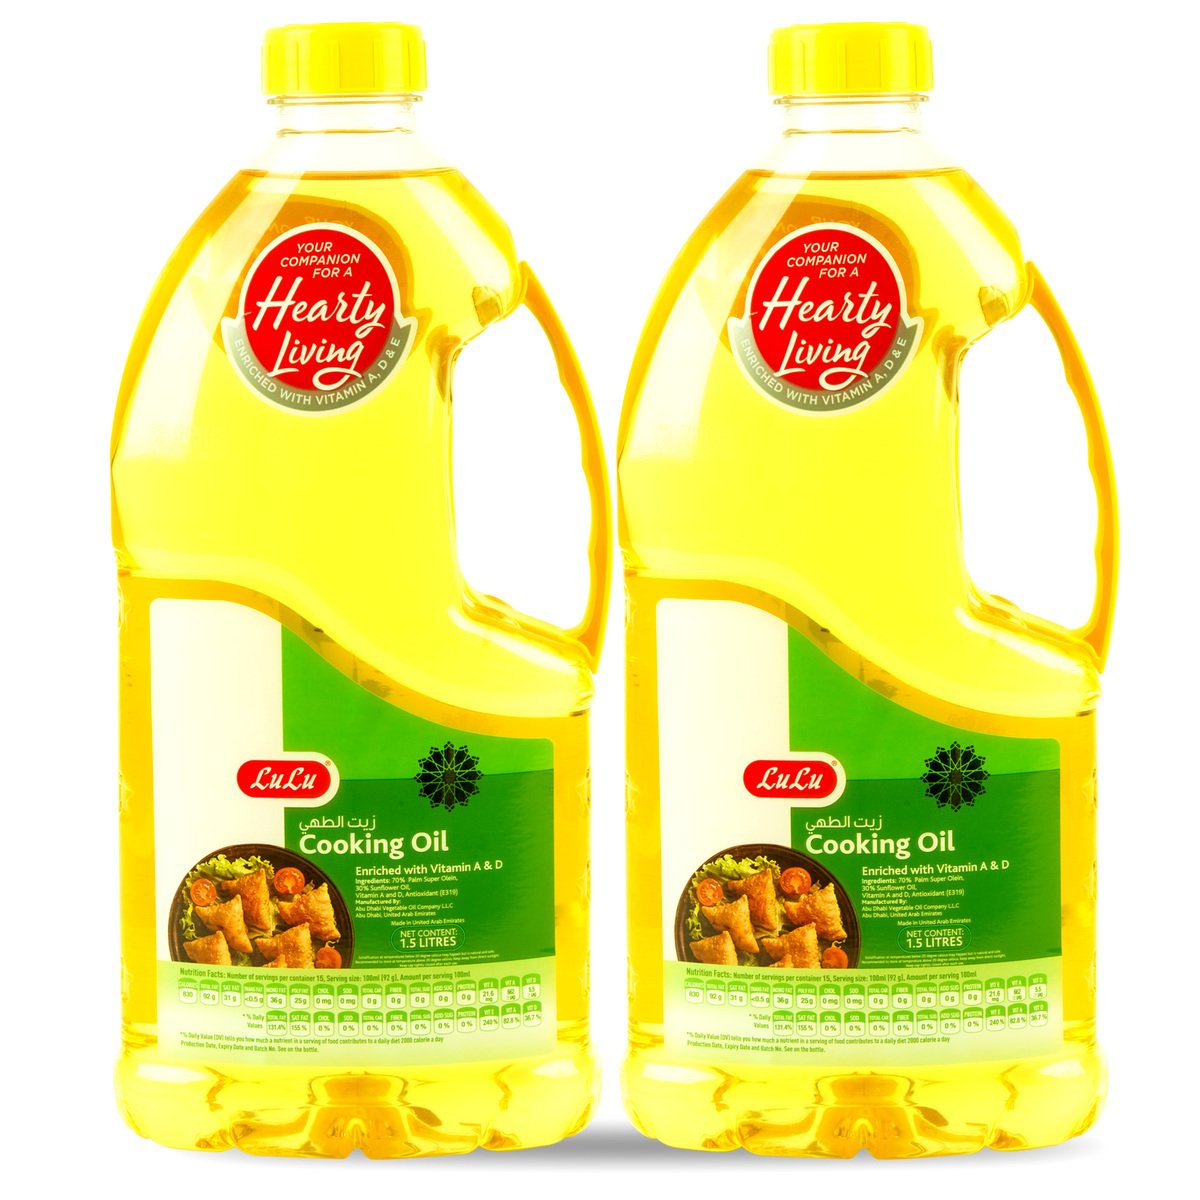 LuLu Cooking Oil 2 x 1.5 Litres